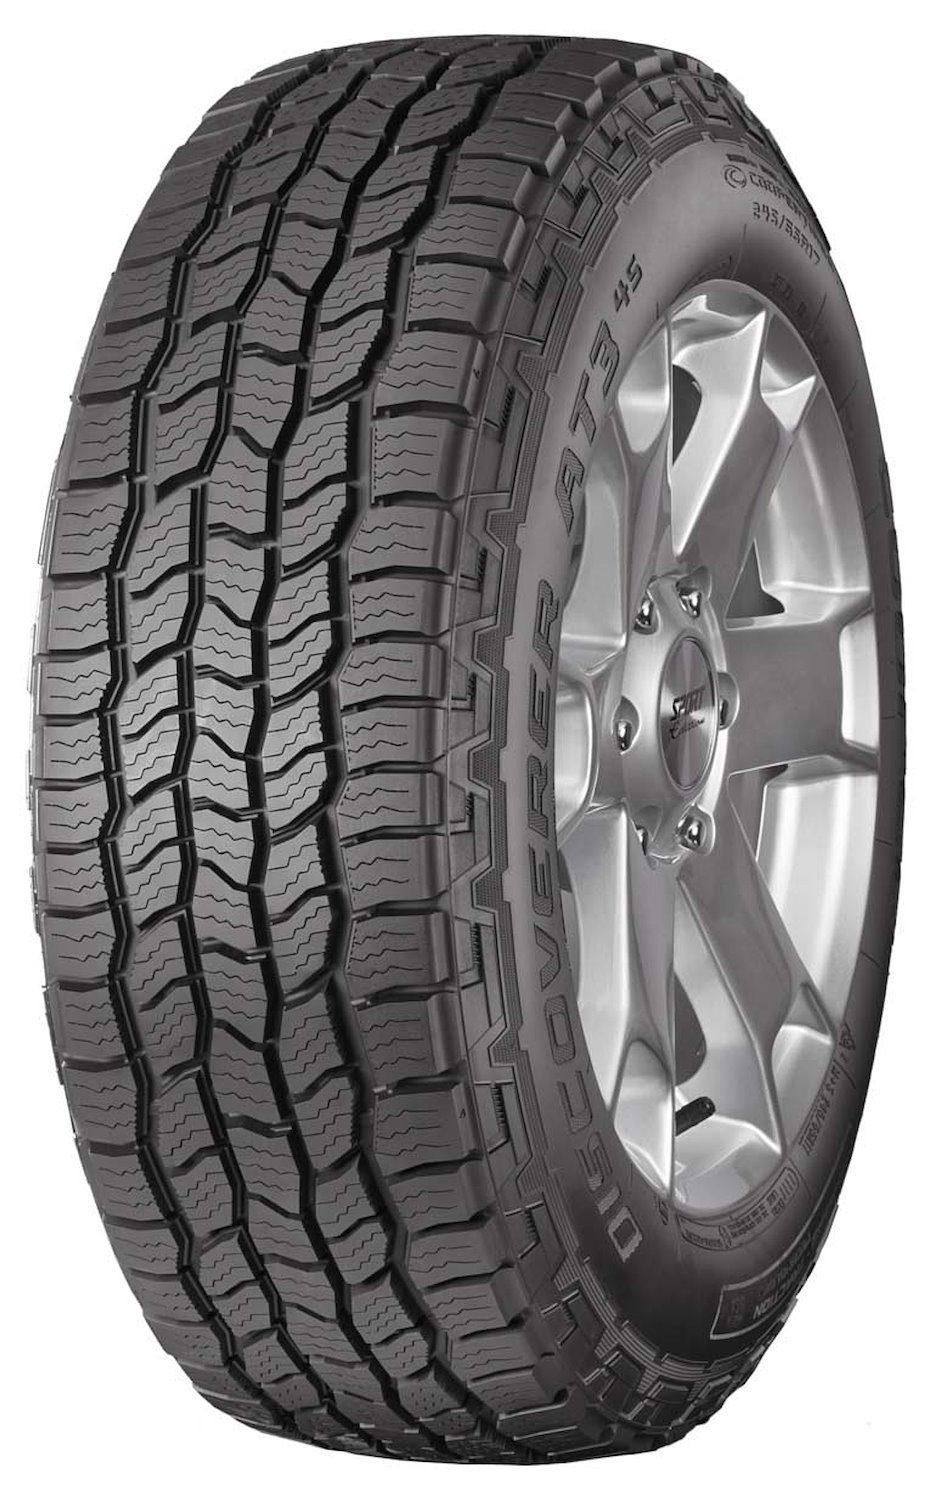 Discoverer AT3 4S All-Terrain Tire, 225/65R17